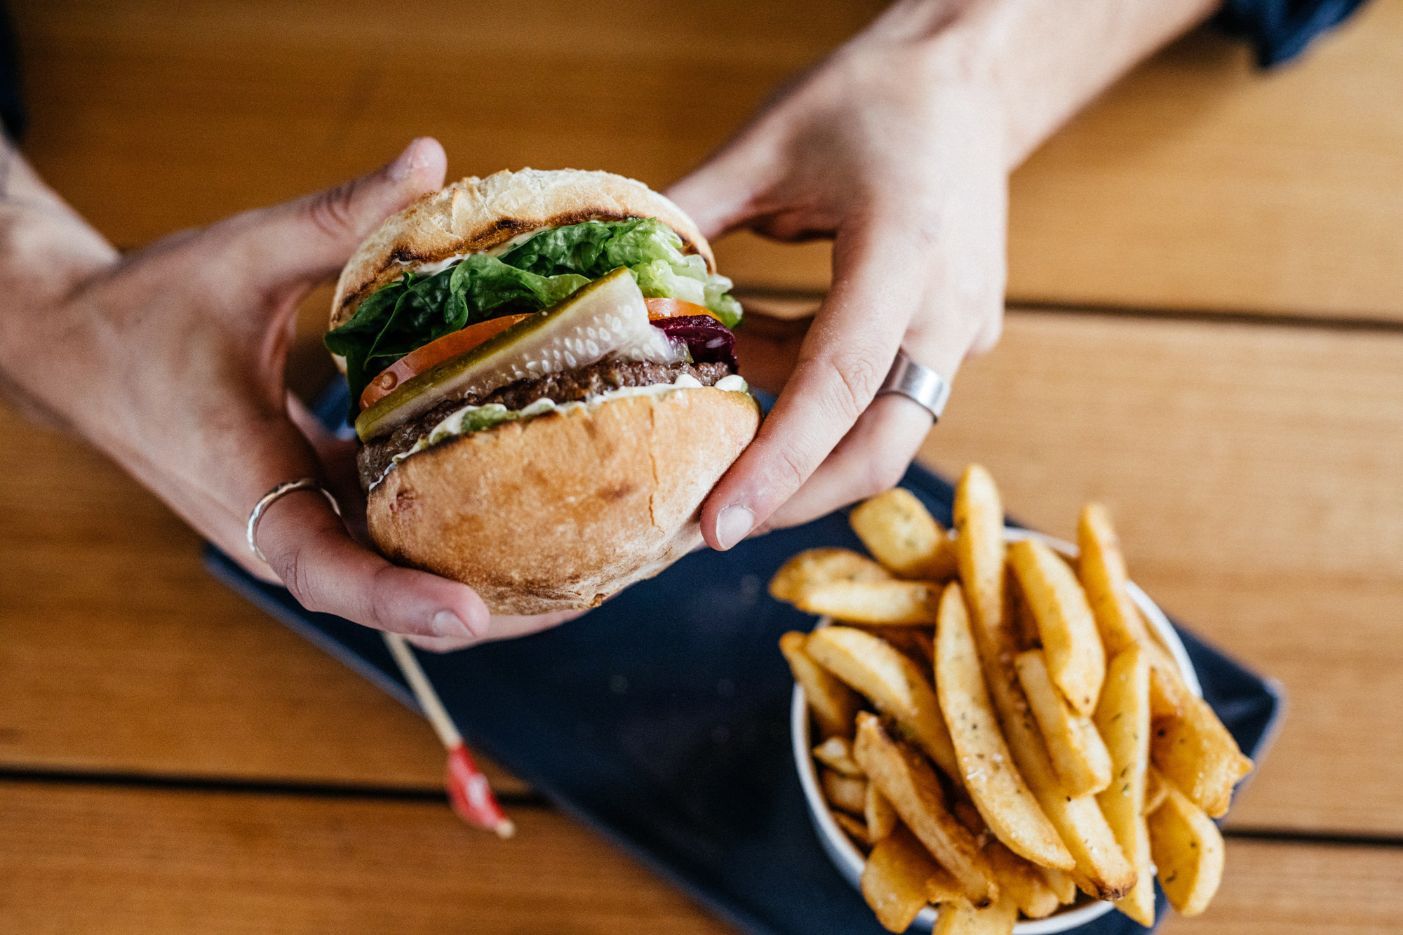 We expect burgers galore when Grill’d opens its doors in Bali in December. Photo: Grill’d 